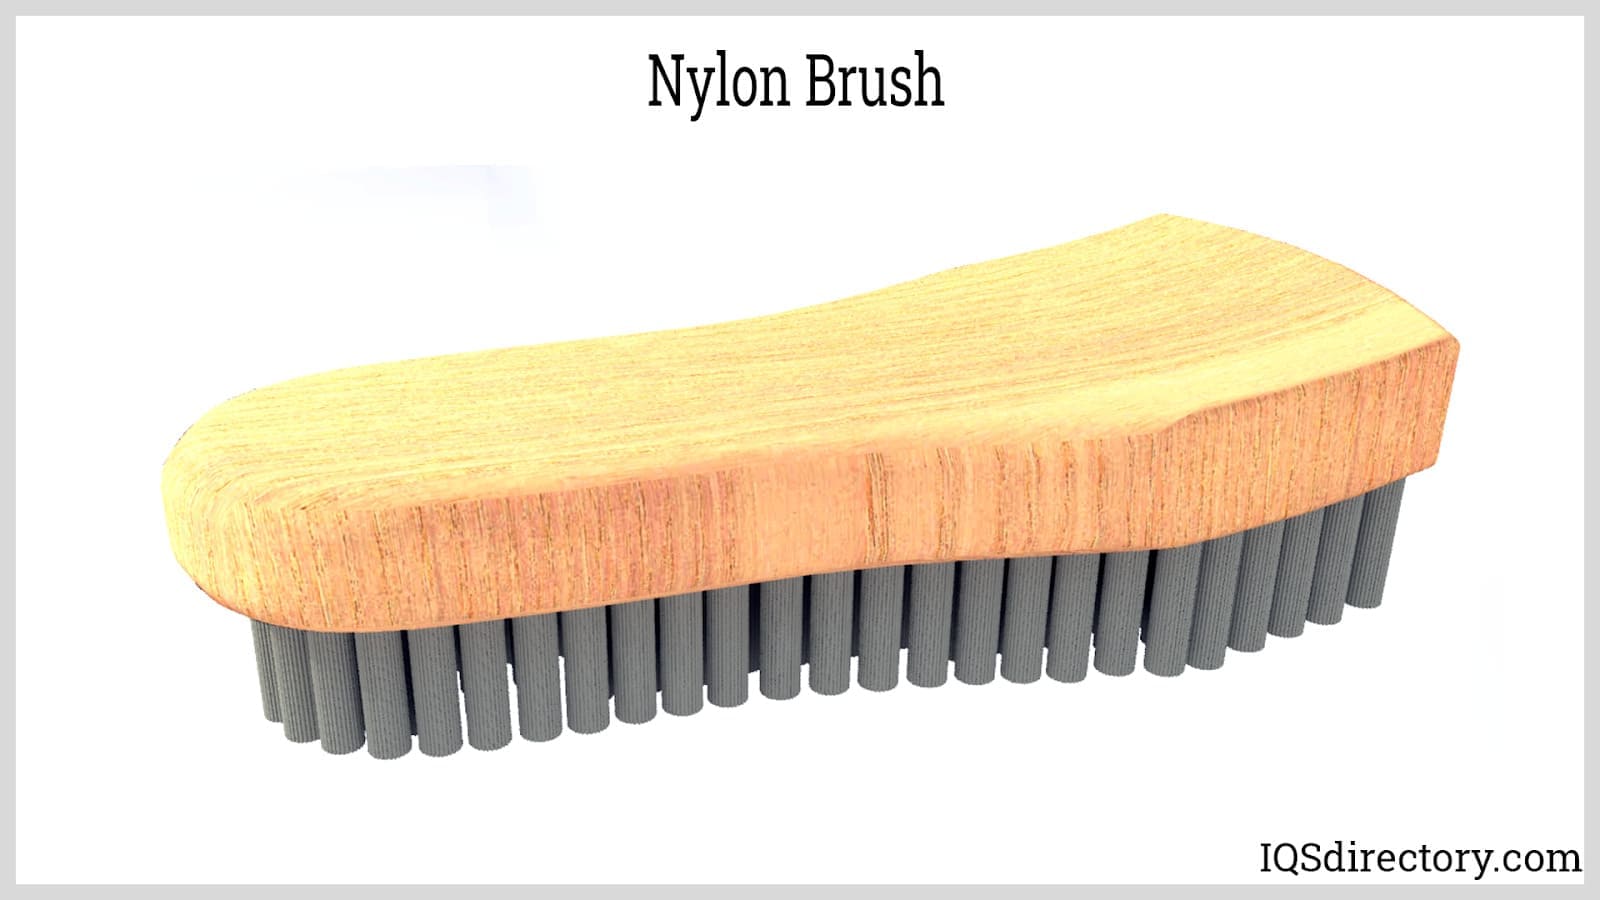 Finest engine brush | 360° brush head, durable PP handle and PP bristles